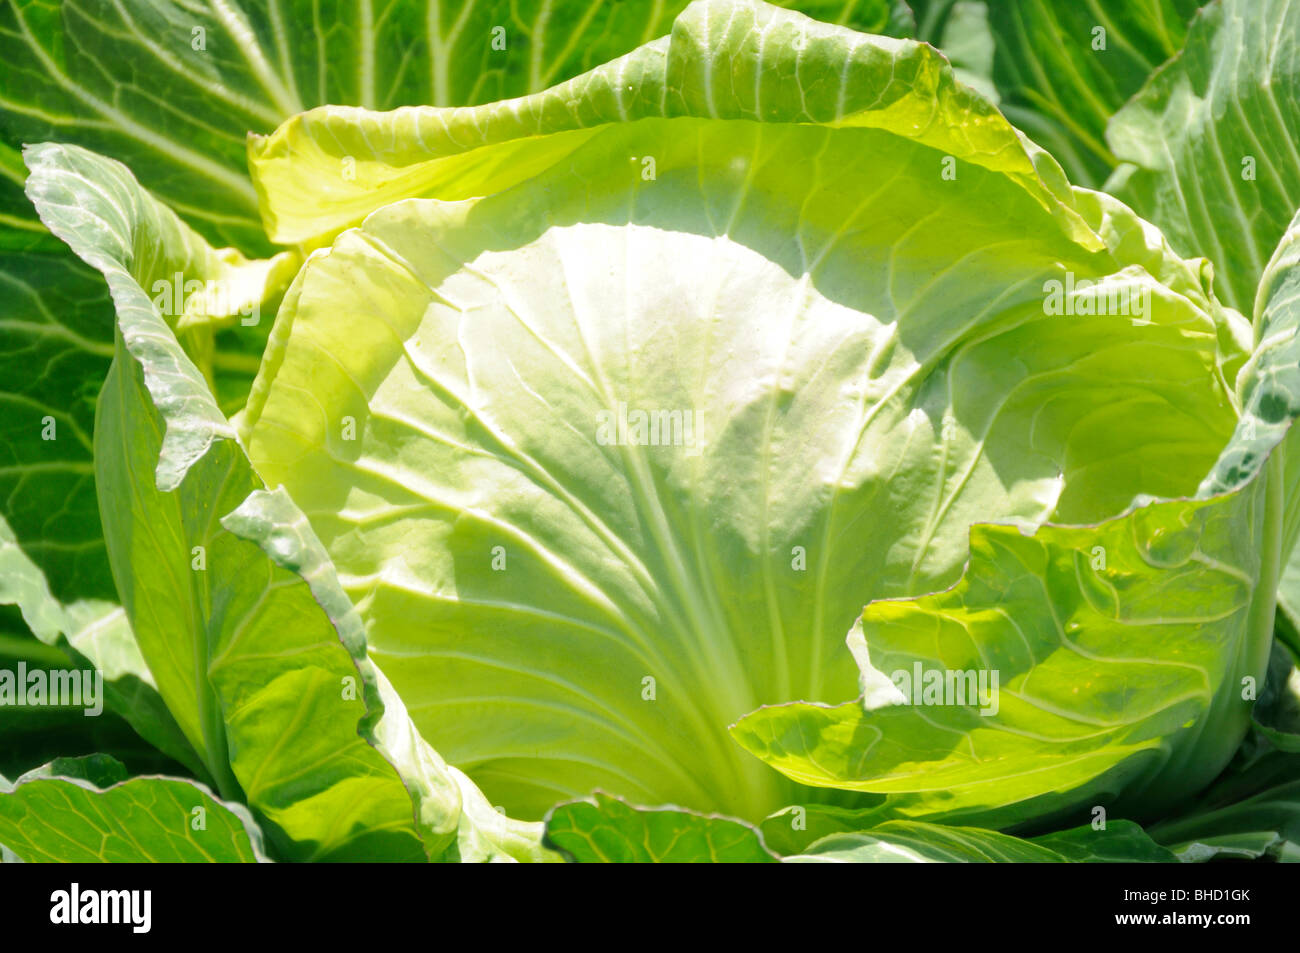 Cabbage growing in field Stock Photo